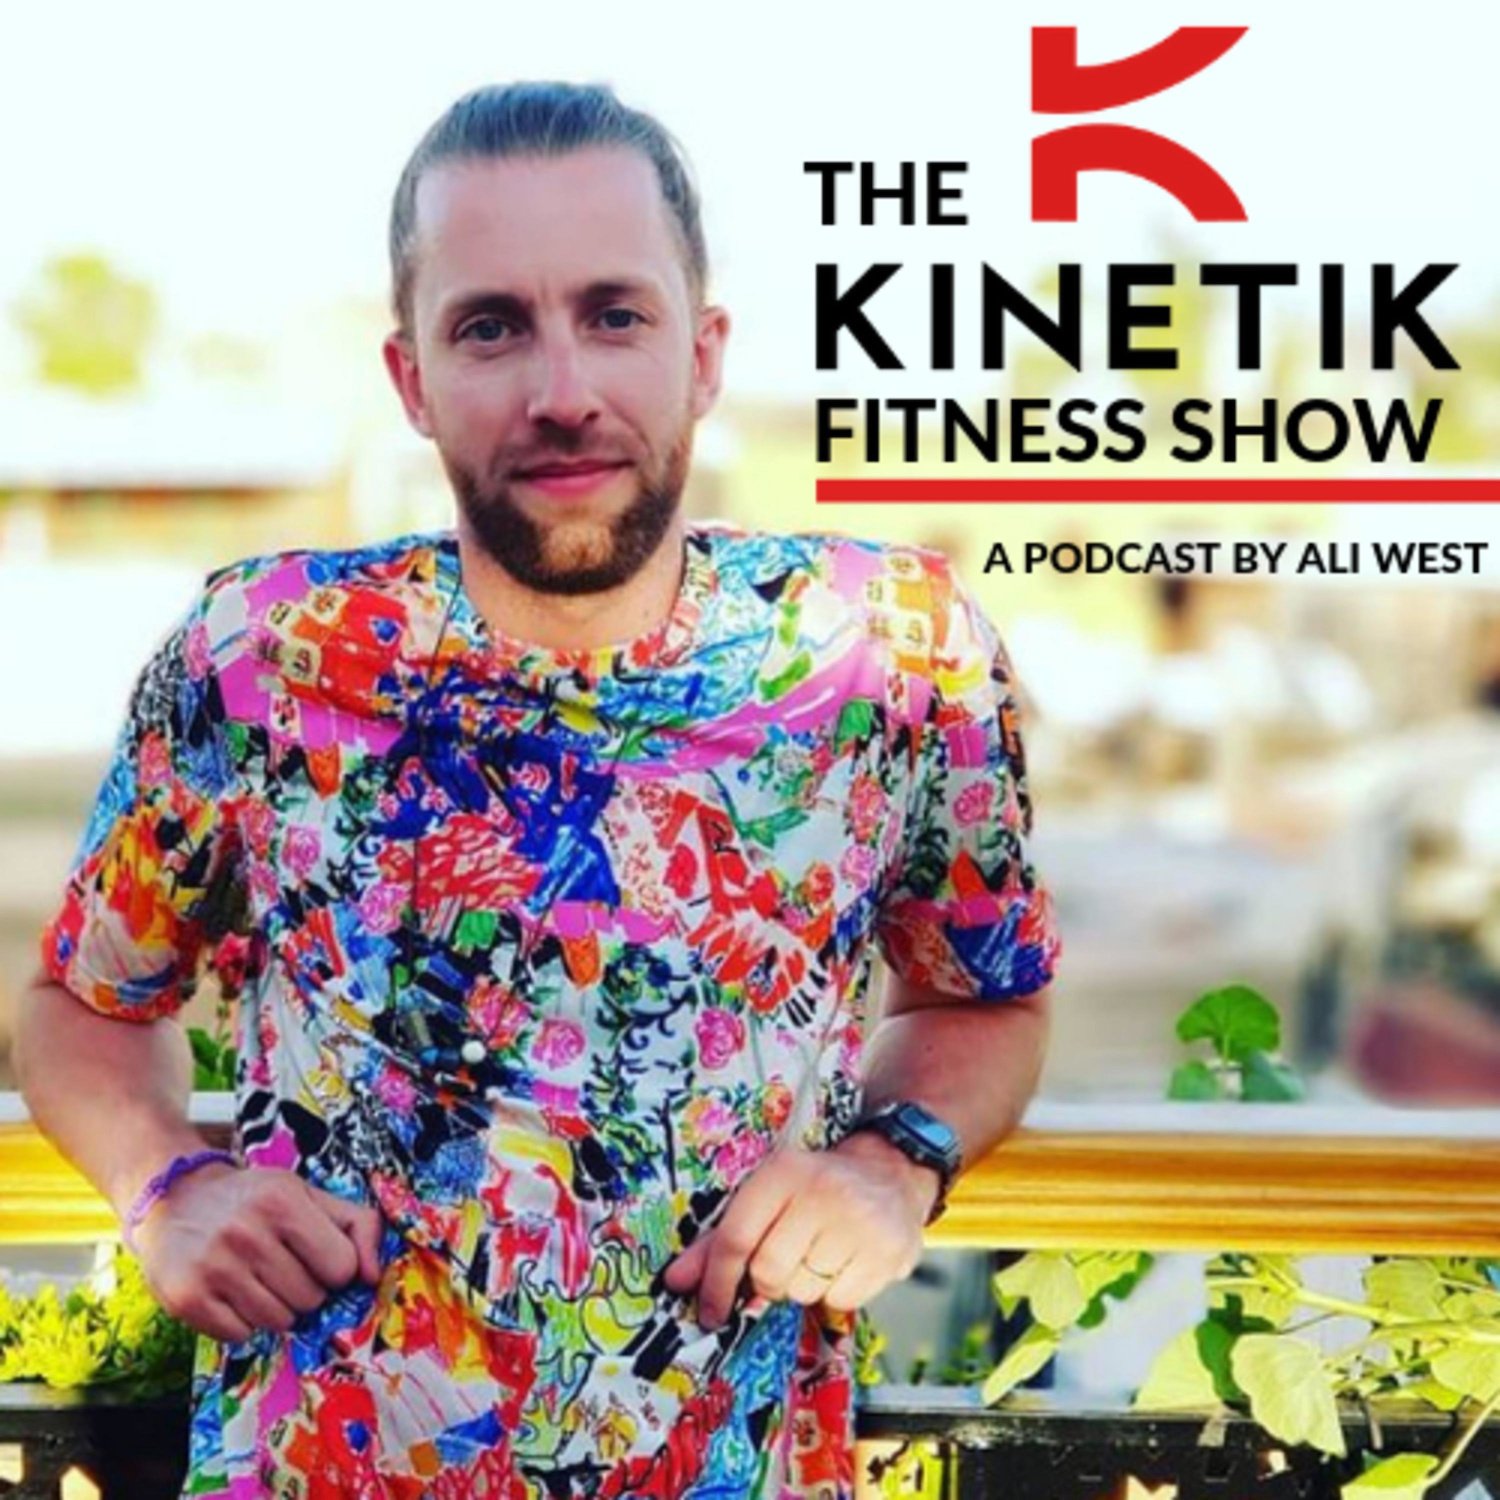 An interview with Ali West on The Kinetik Fitness Show